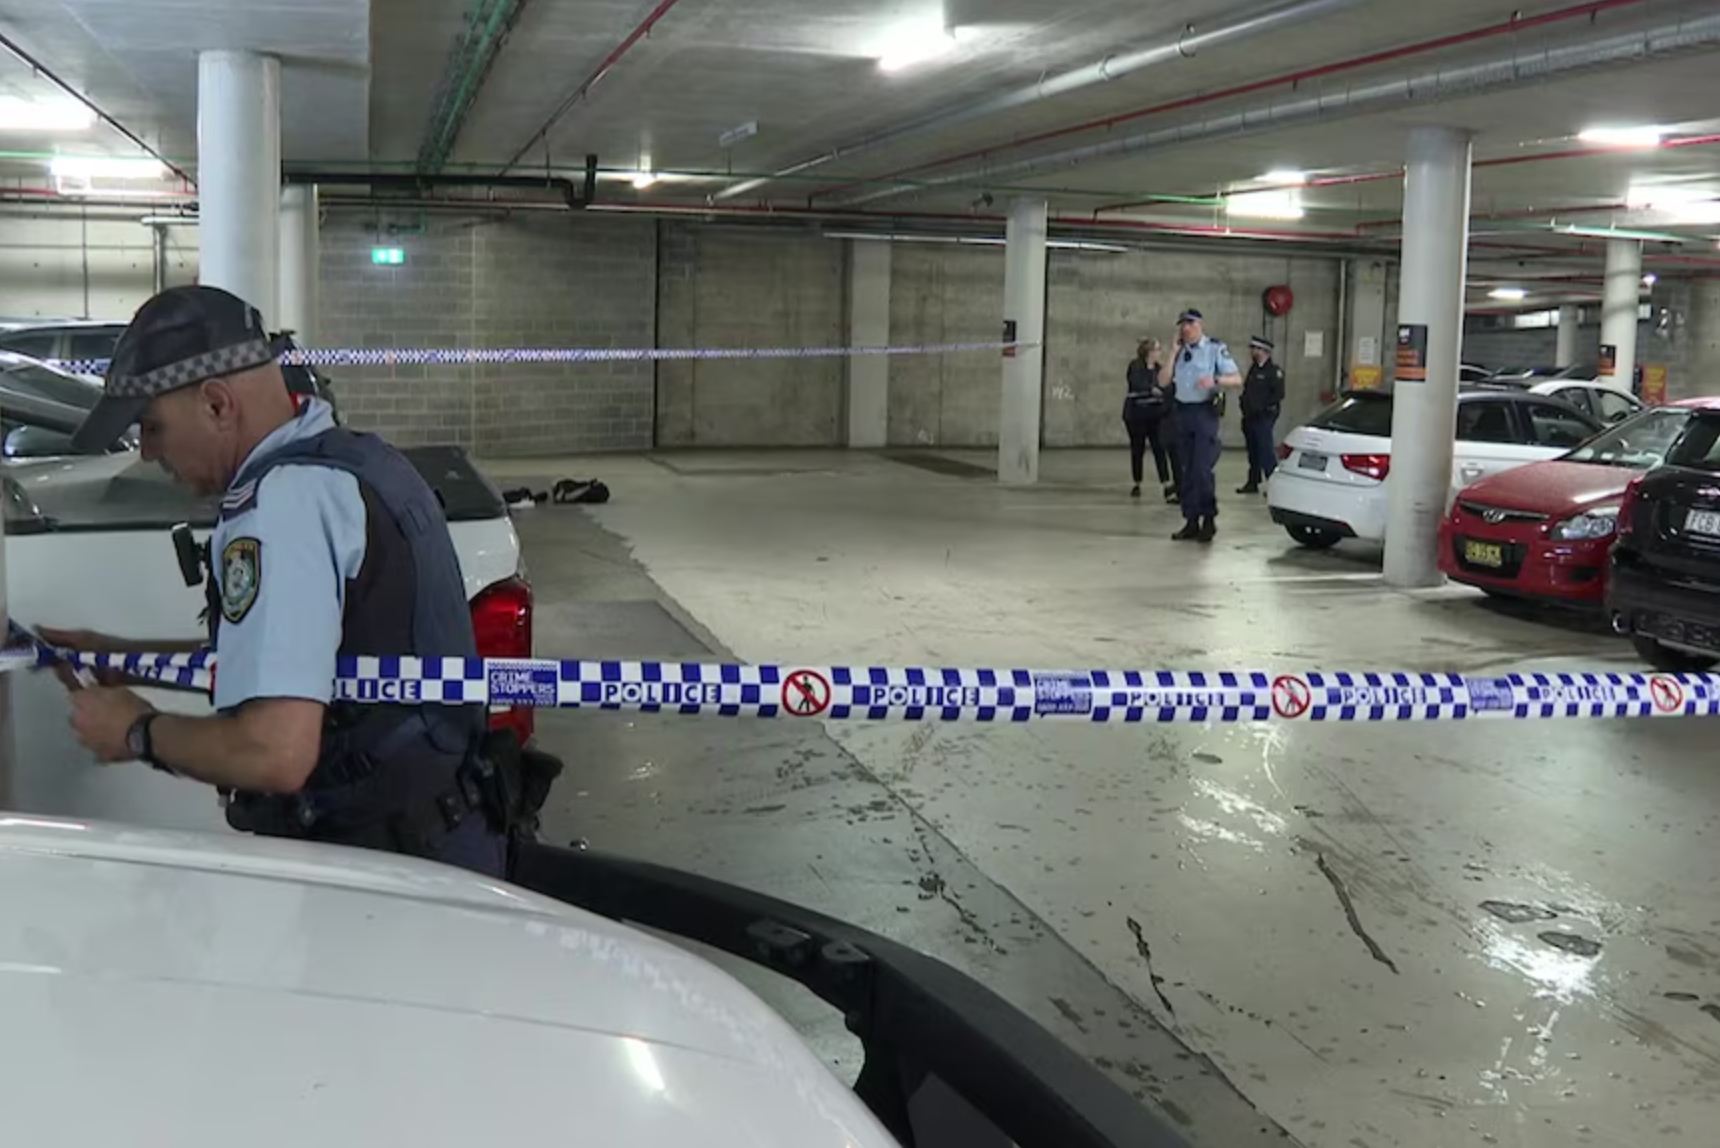 Woman stabbed in inner-city gym in Sydney